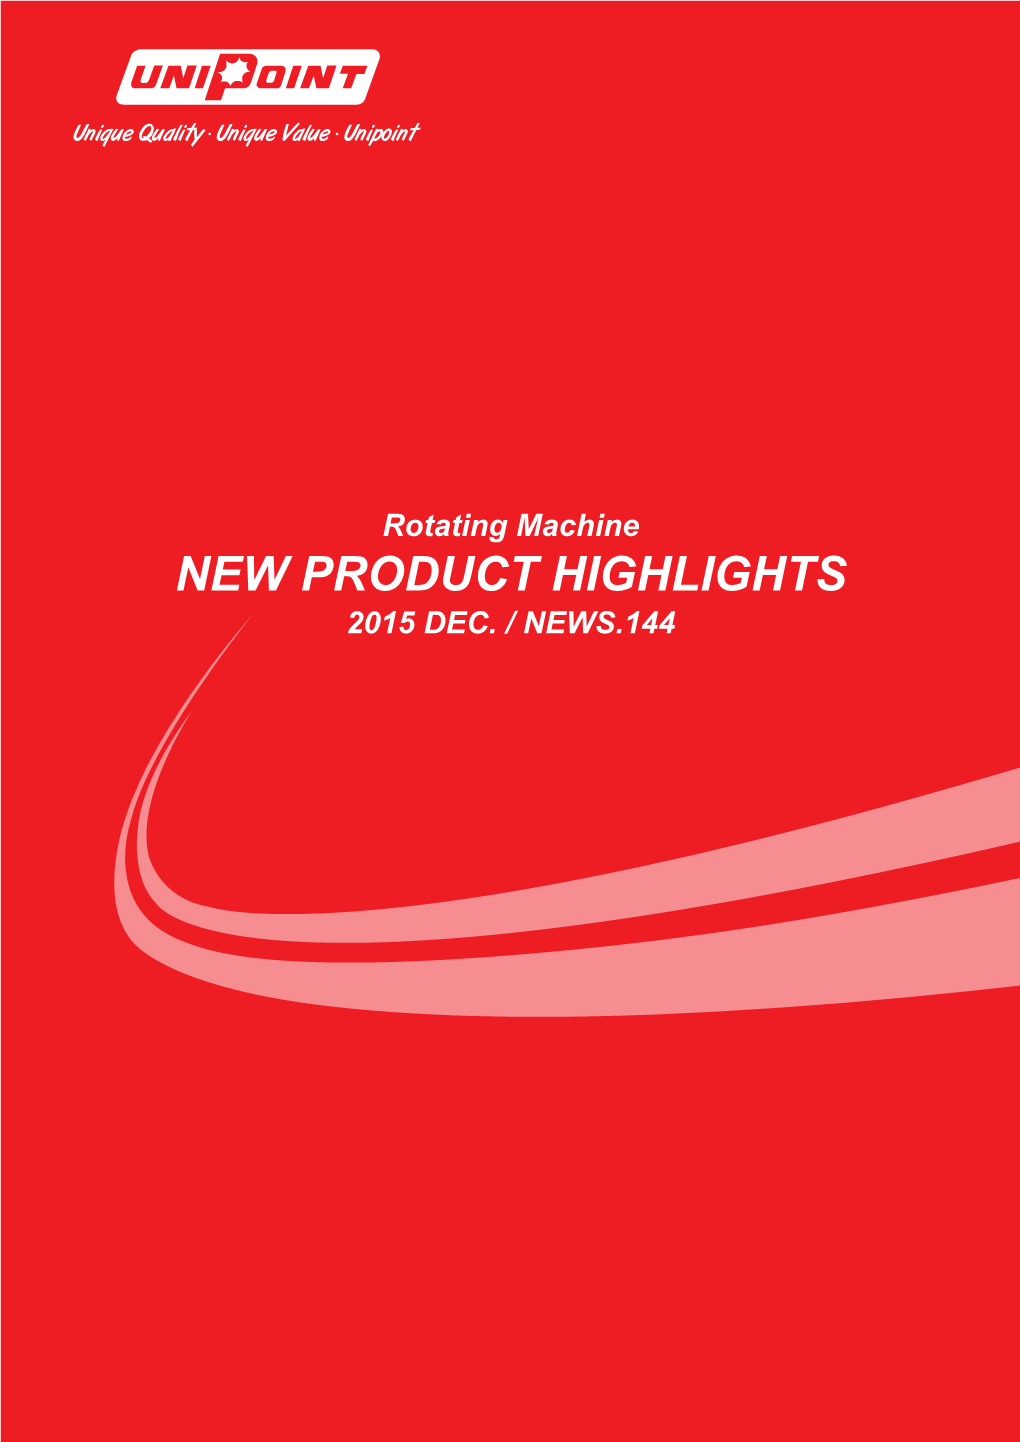 New Product Highlights 2015 Dec